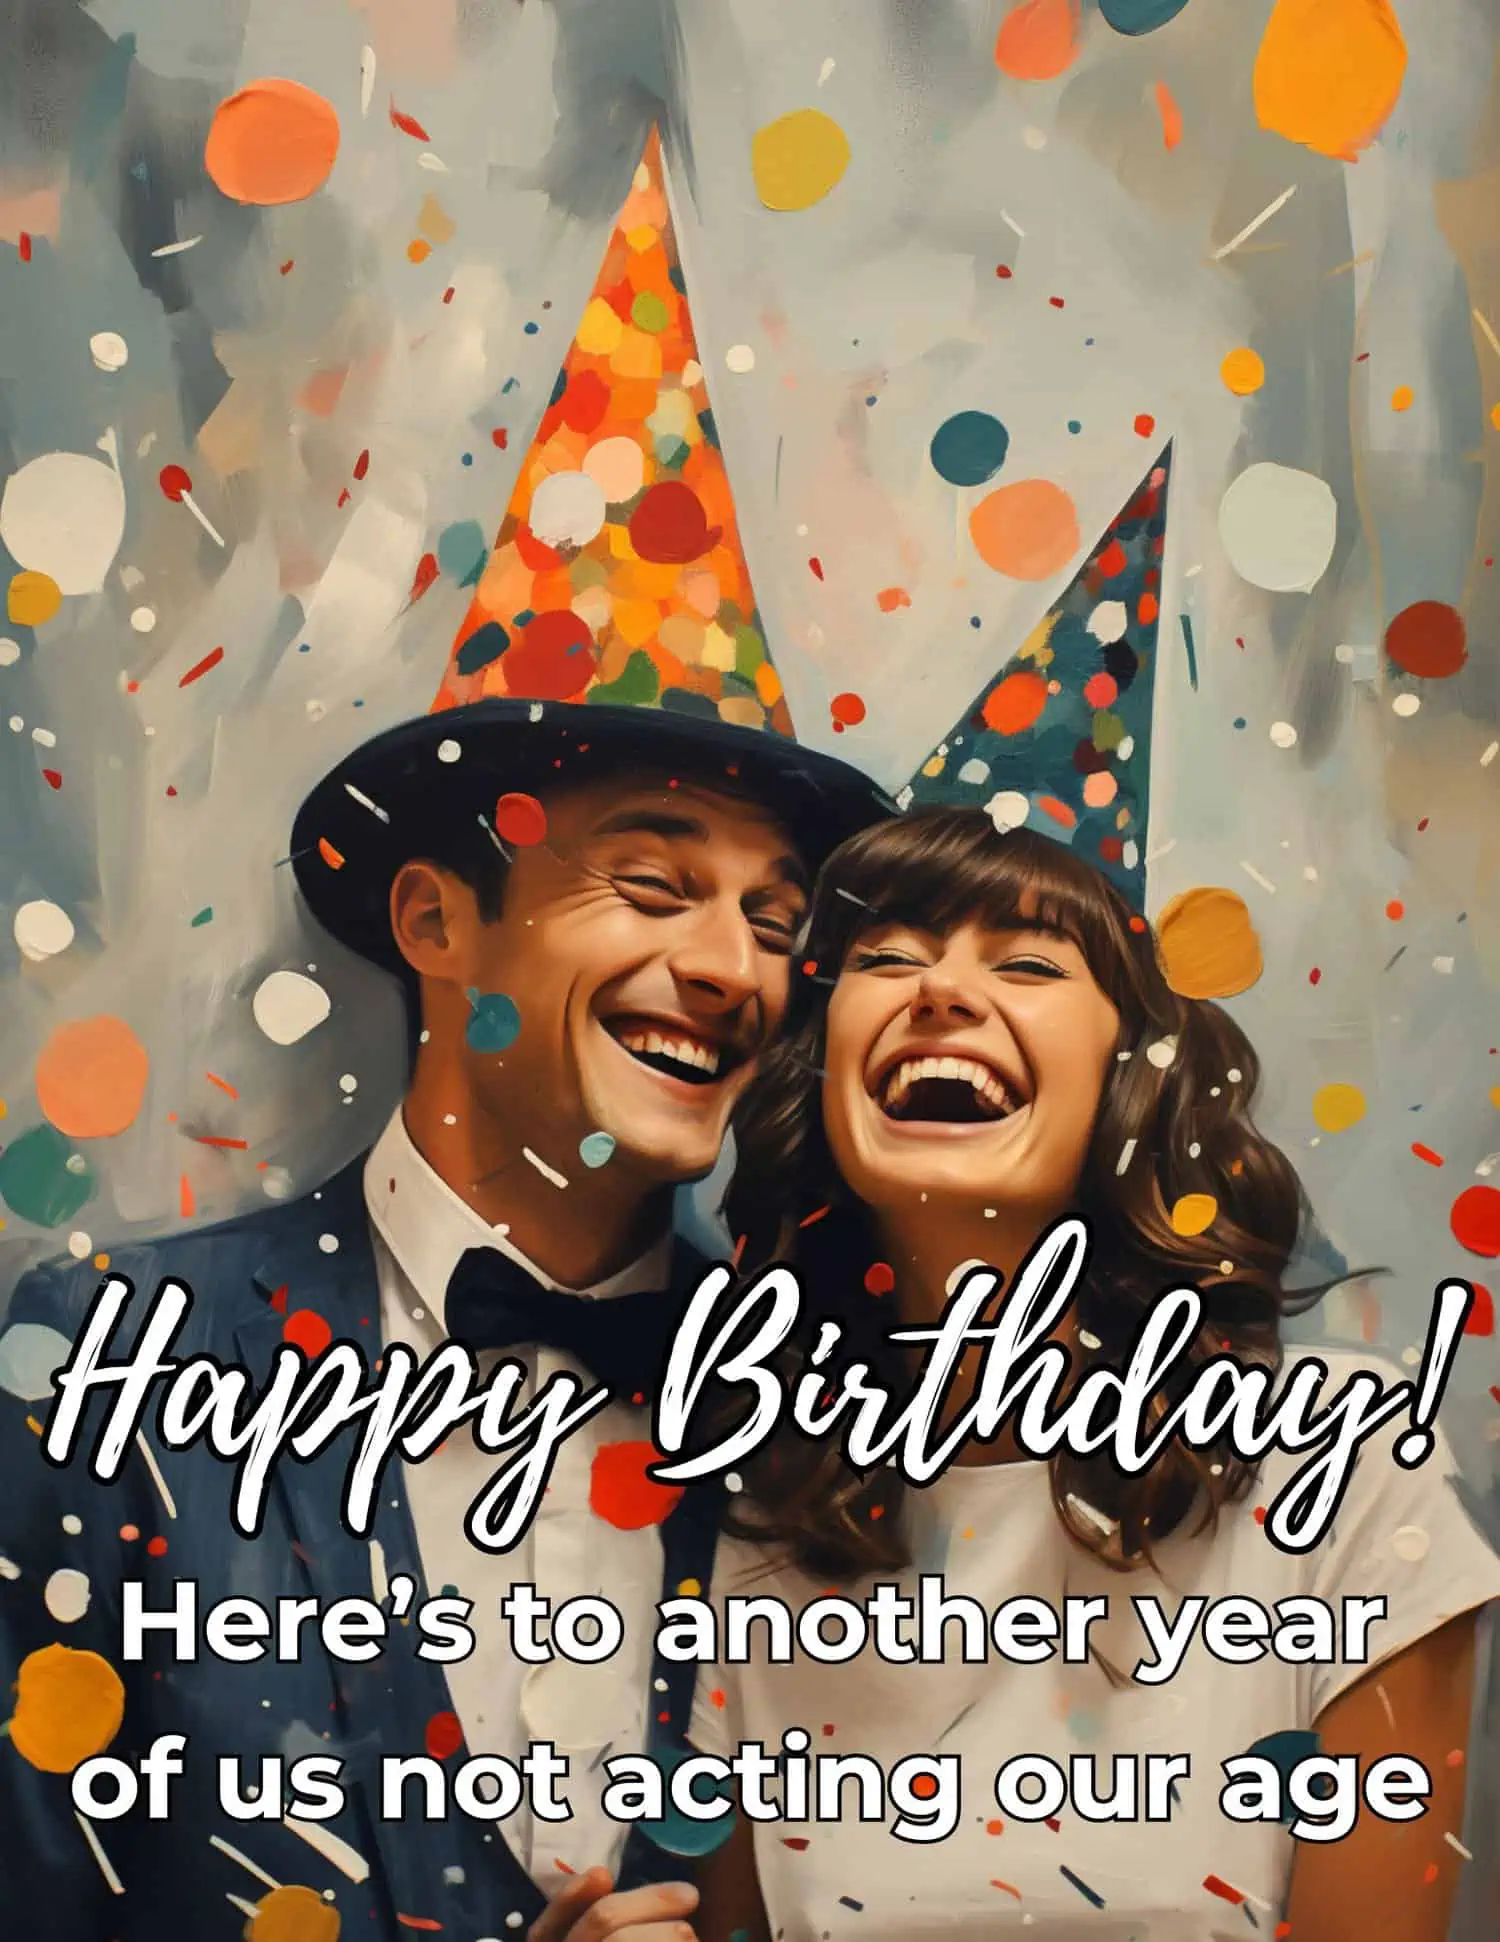 Hilarious and playful birthday messages for your significant other.